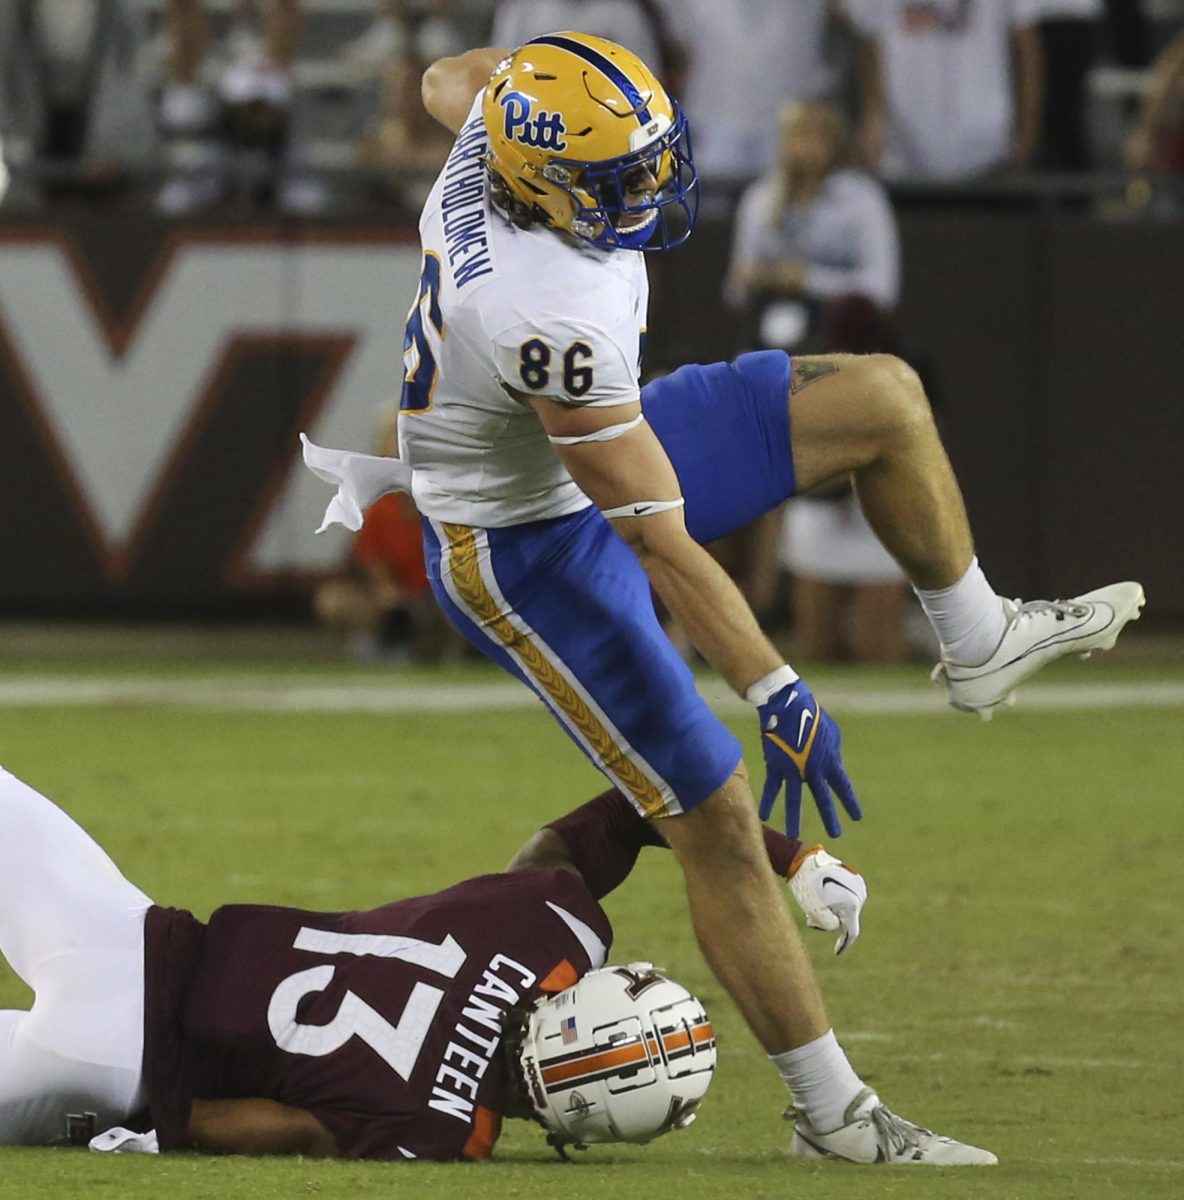 Pittsburghs Gavin Bartholomew (86) is tripped by Virginia Tech defender Derrick Canteen (13) during the second half of an NCAA college football game Saturday, Sept. 30, 2023, in Blacksburg, Va.